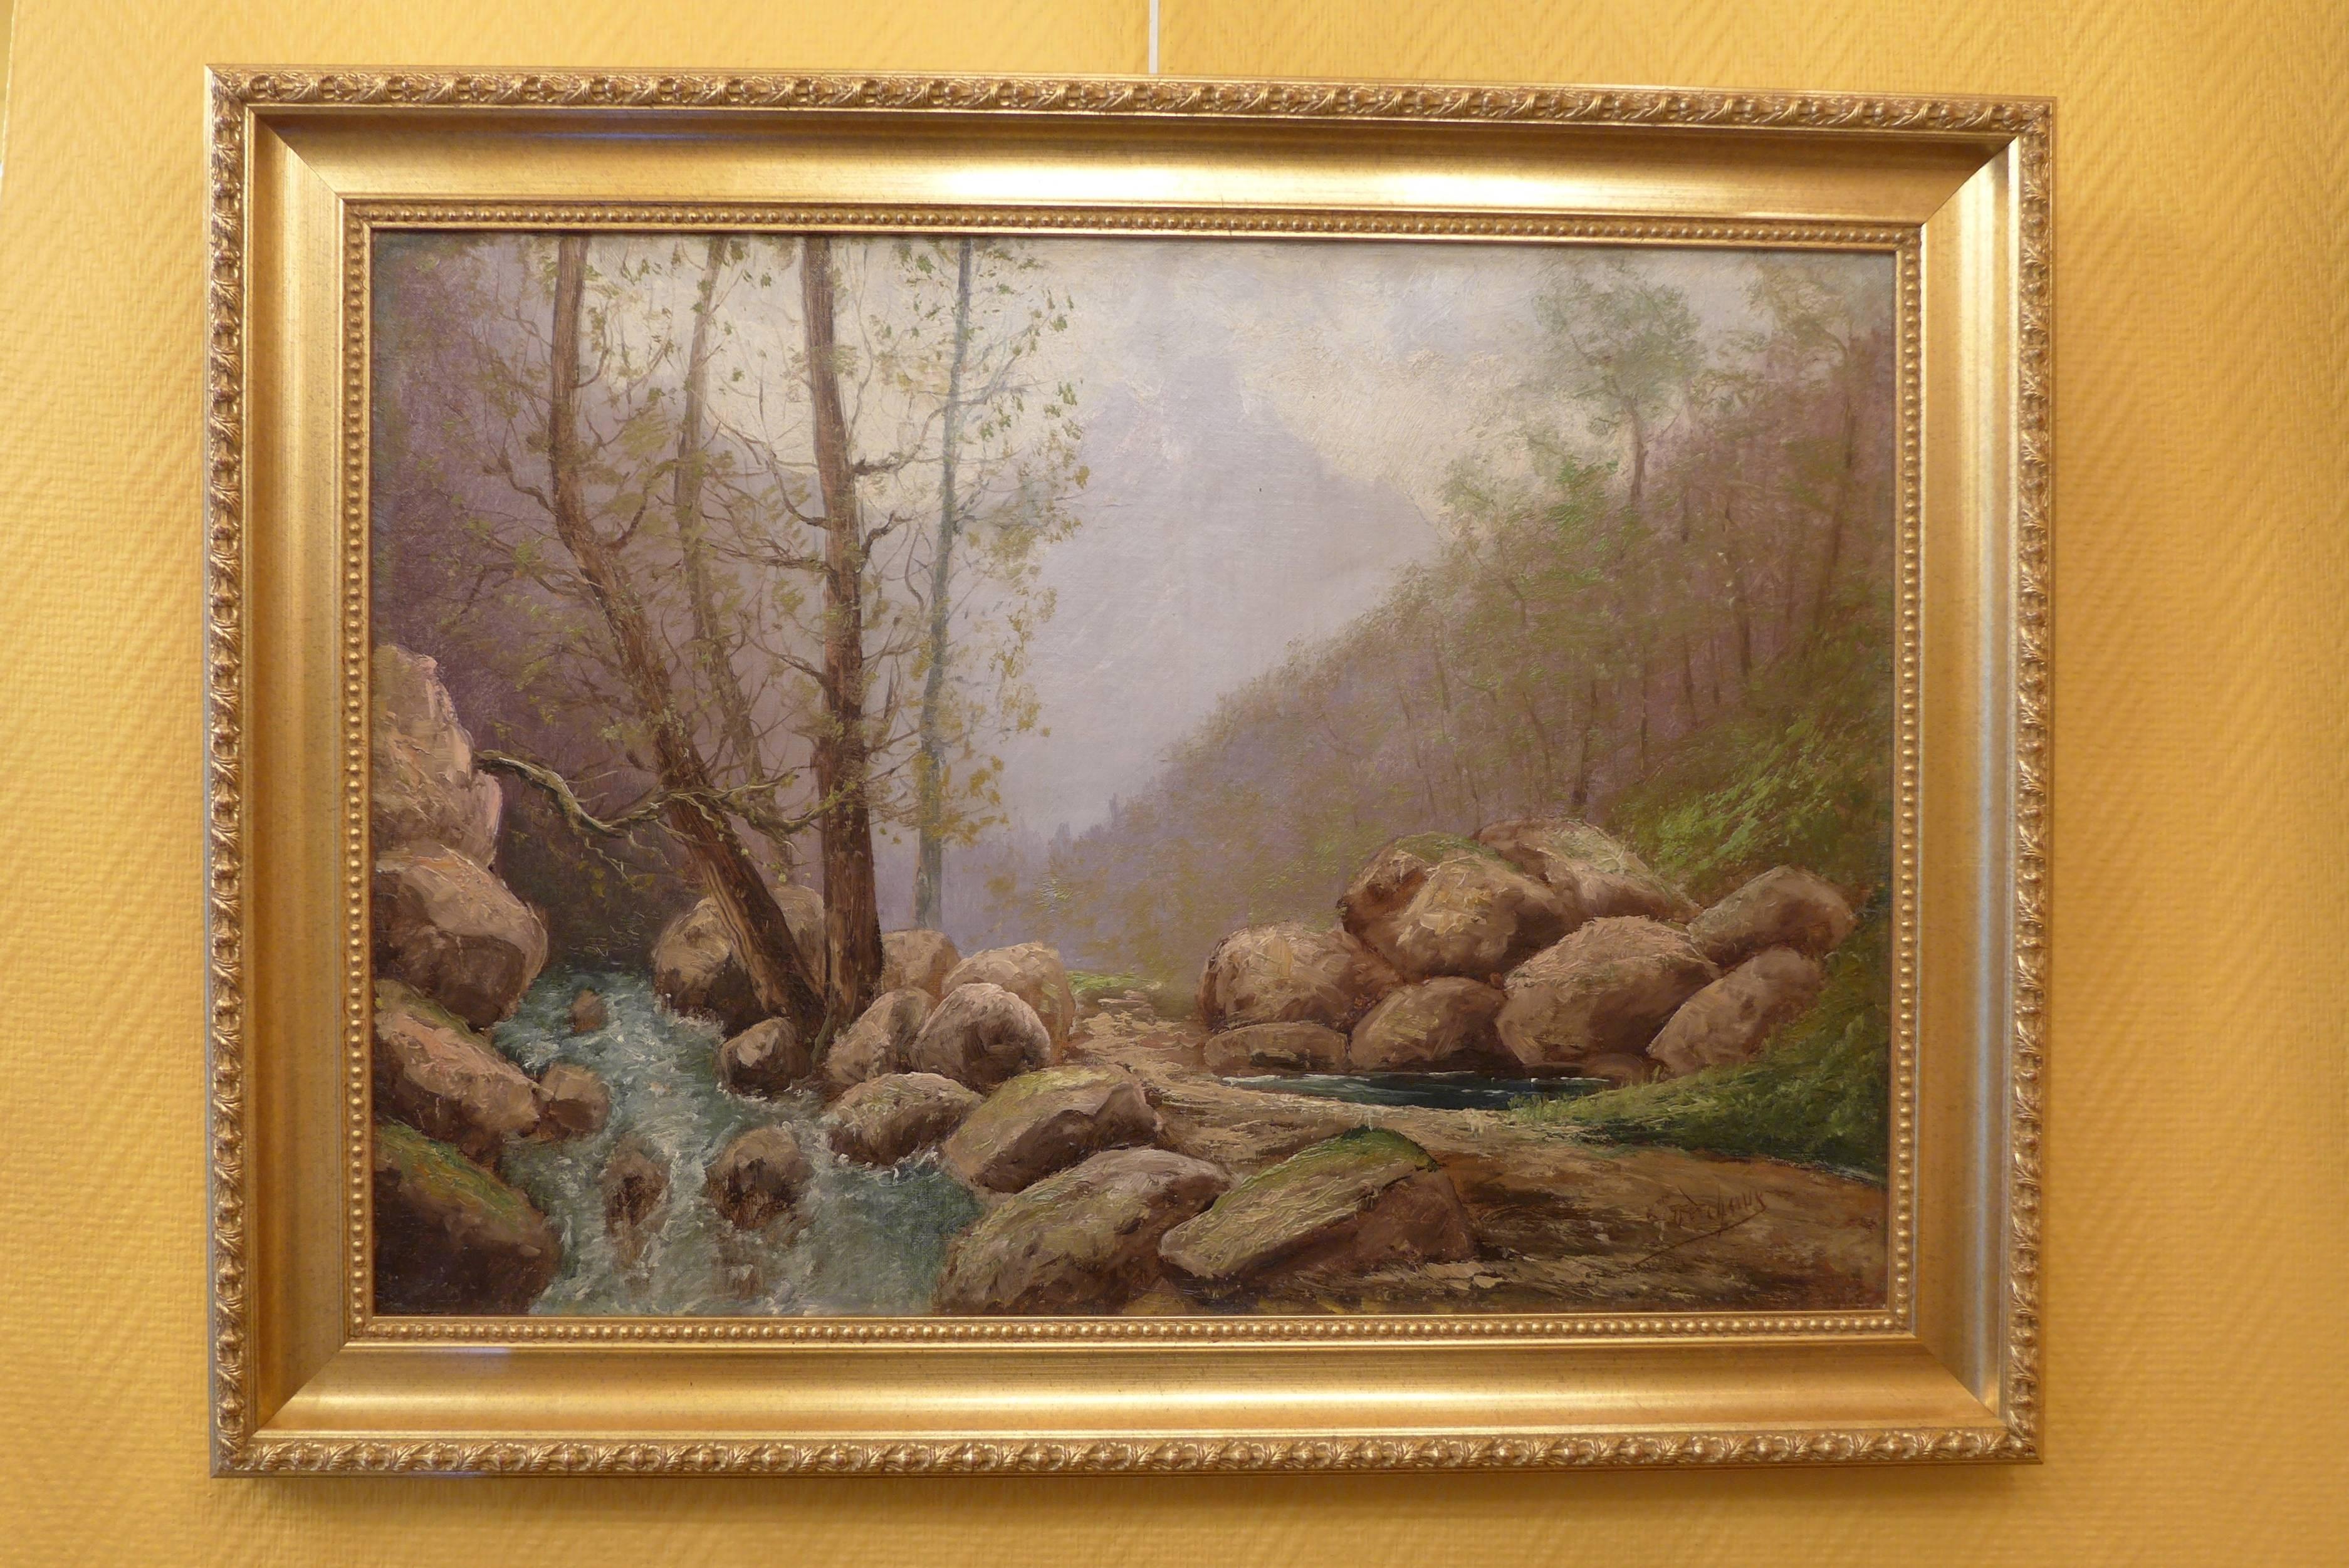 French Mountain stream, oil on canvas signed on the lower right side by Godchaux, circa 1900.

Emile Godchaux: (Bordeaux 1860-1930), was a French landscape painter. 
It appears to be a close relative of Alfred Godchaux (landscape painter) and Roger